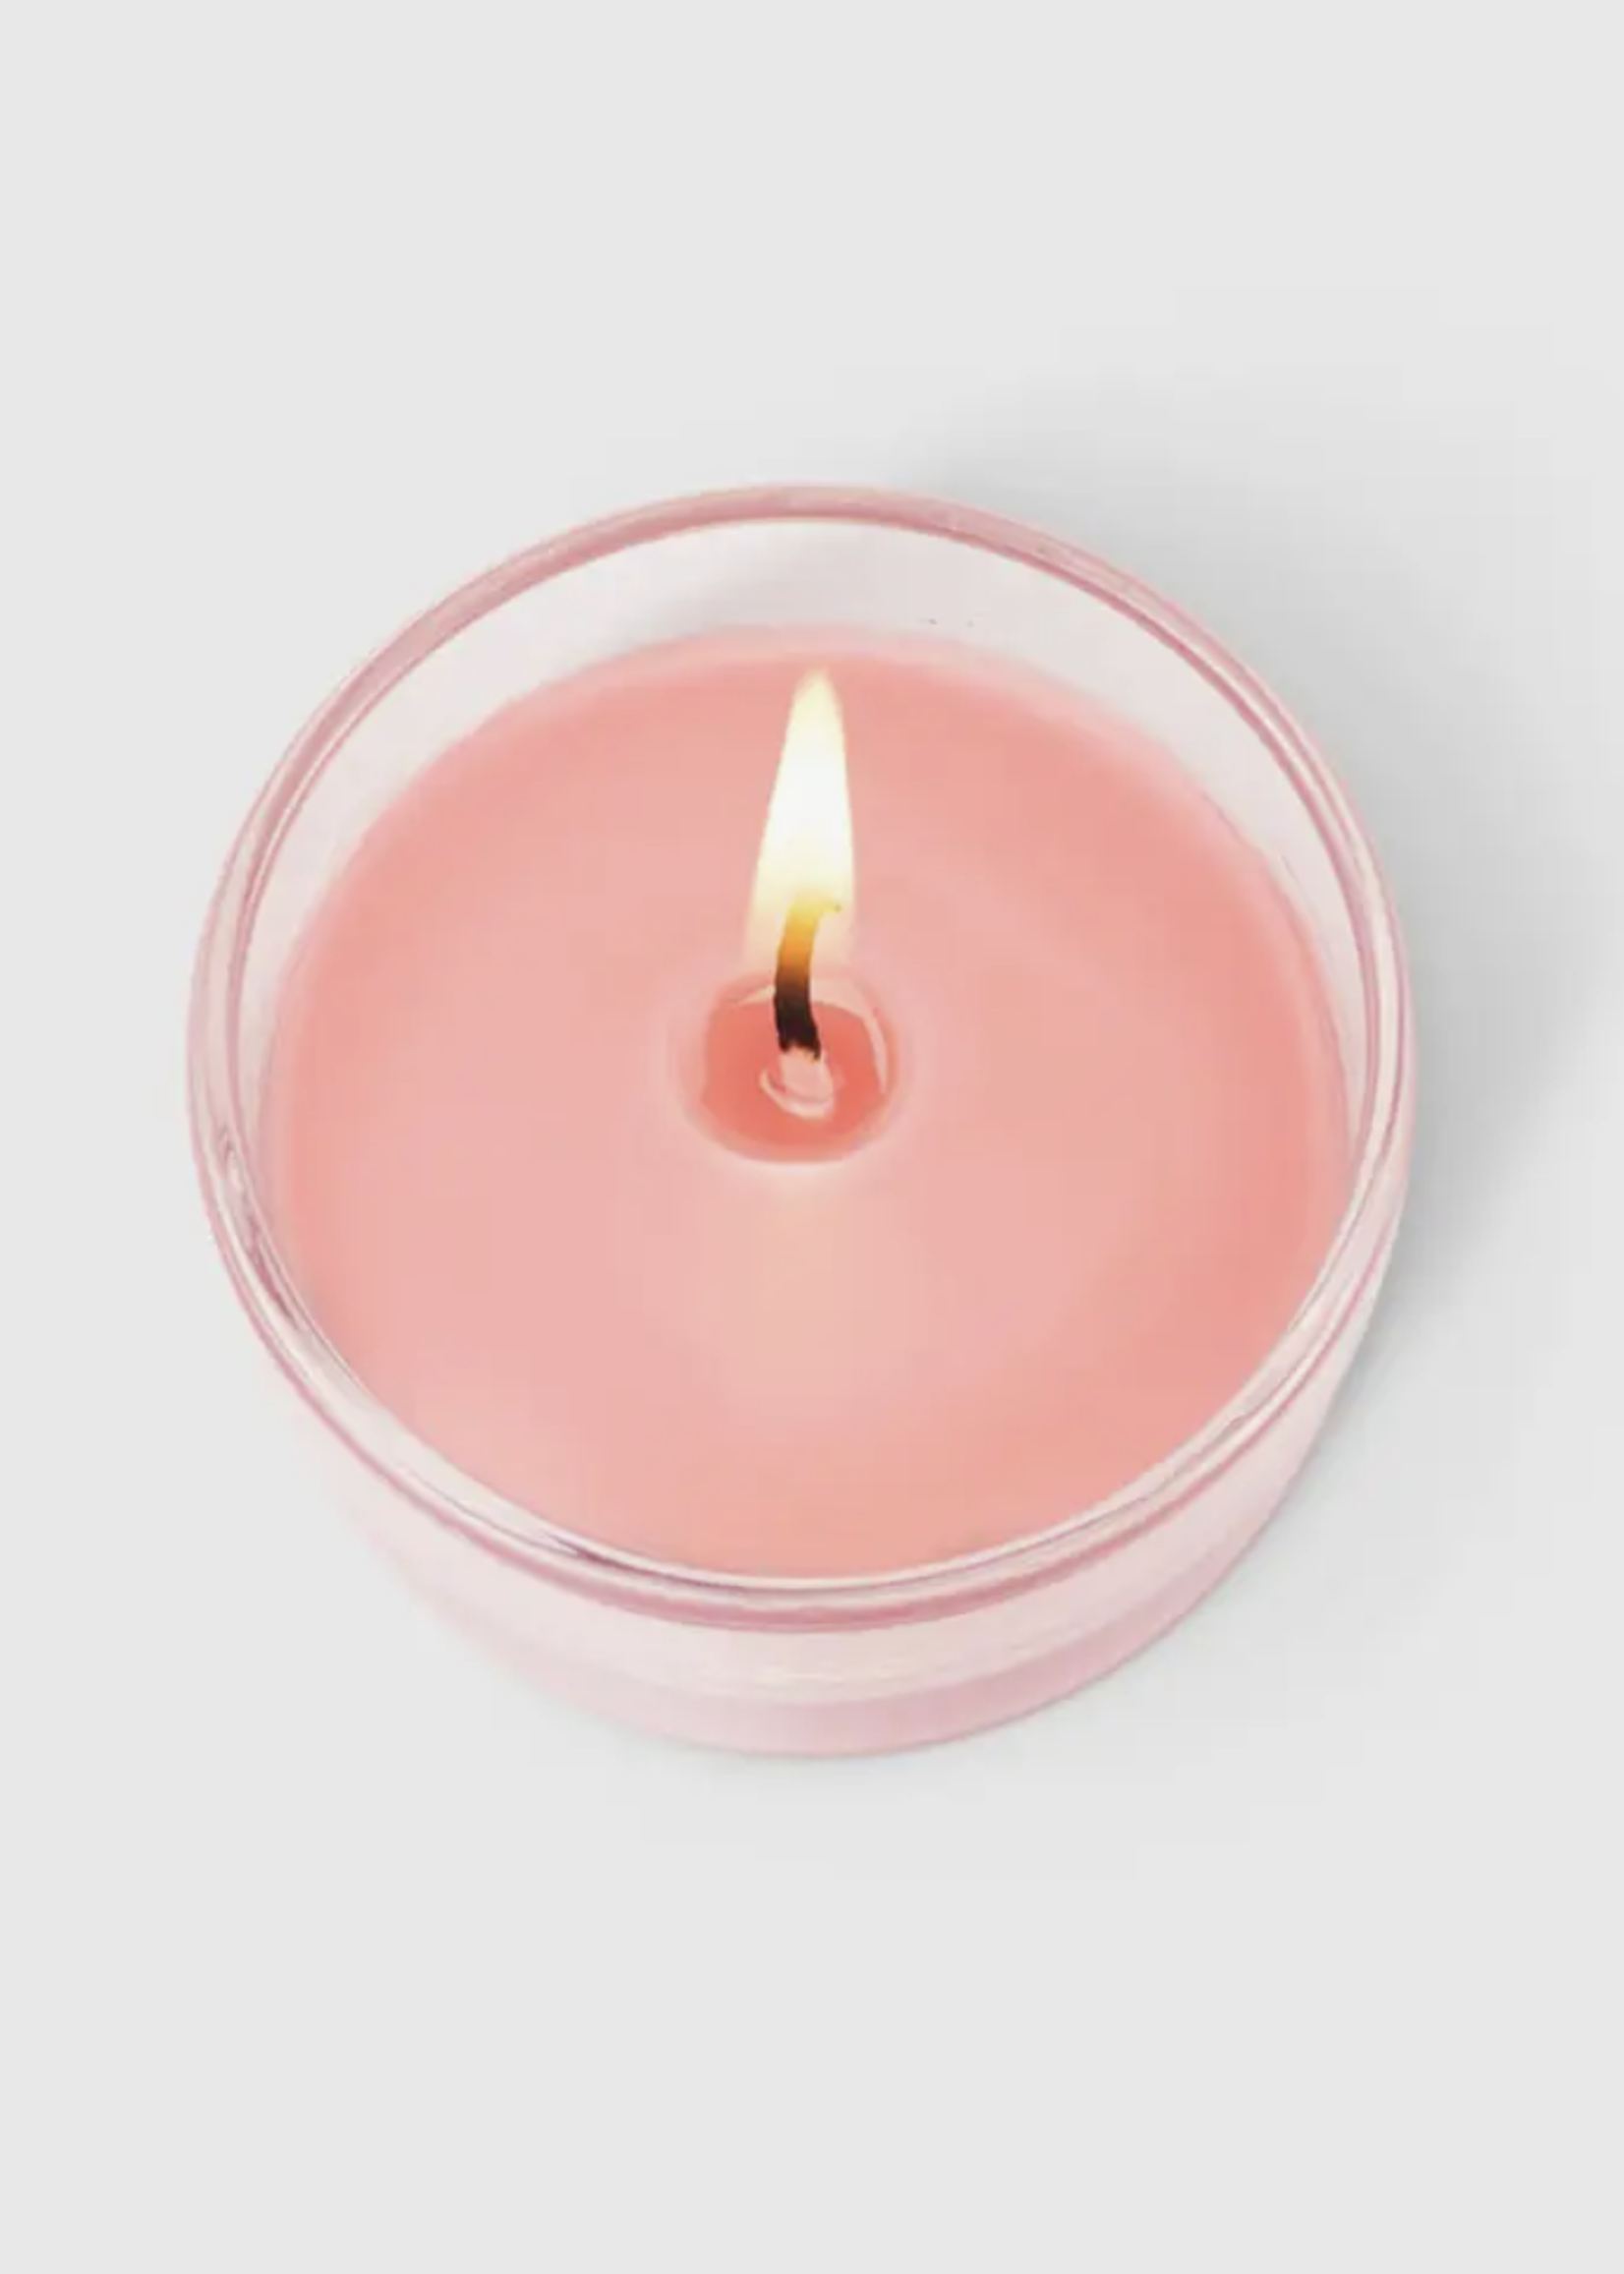 Creative Twist Events You`re Smoking Hot Secret Message Candle